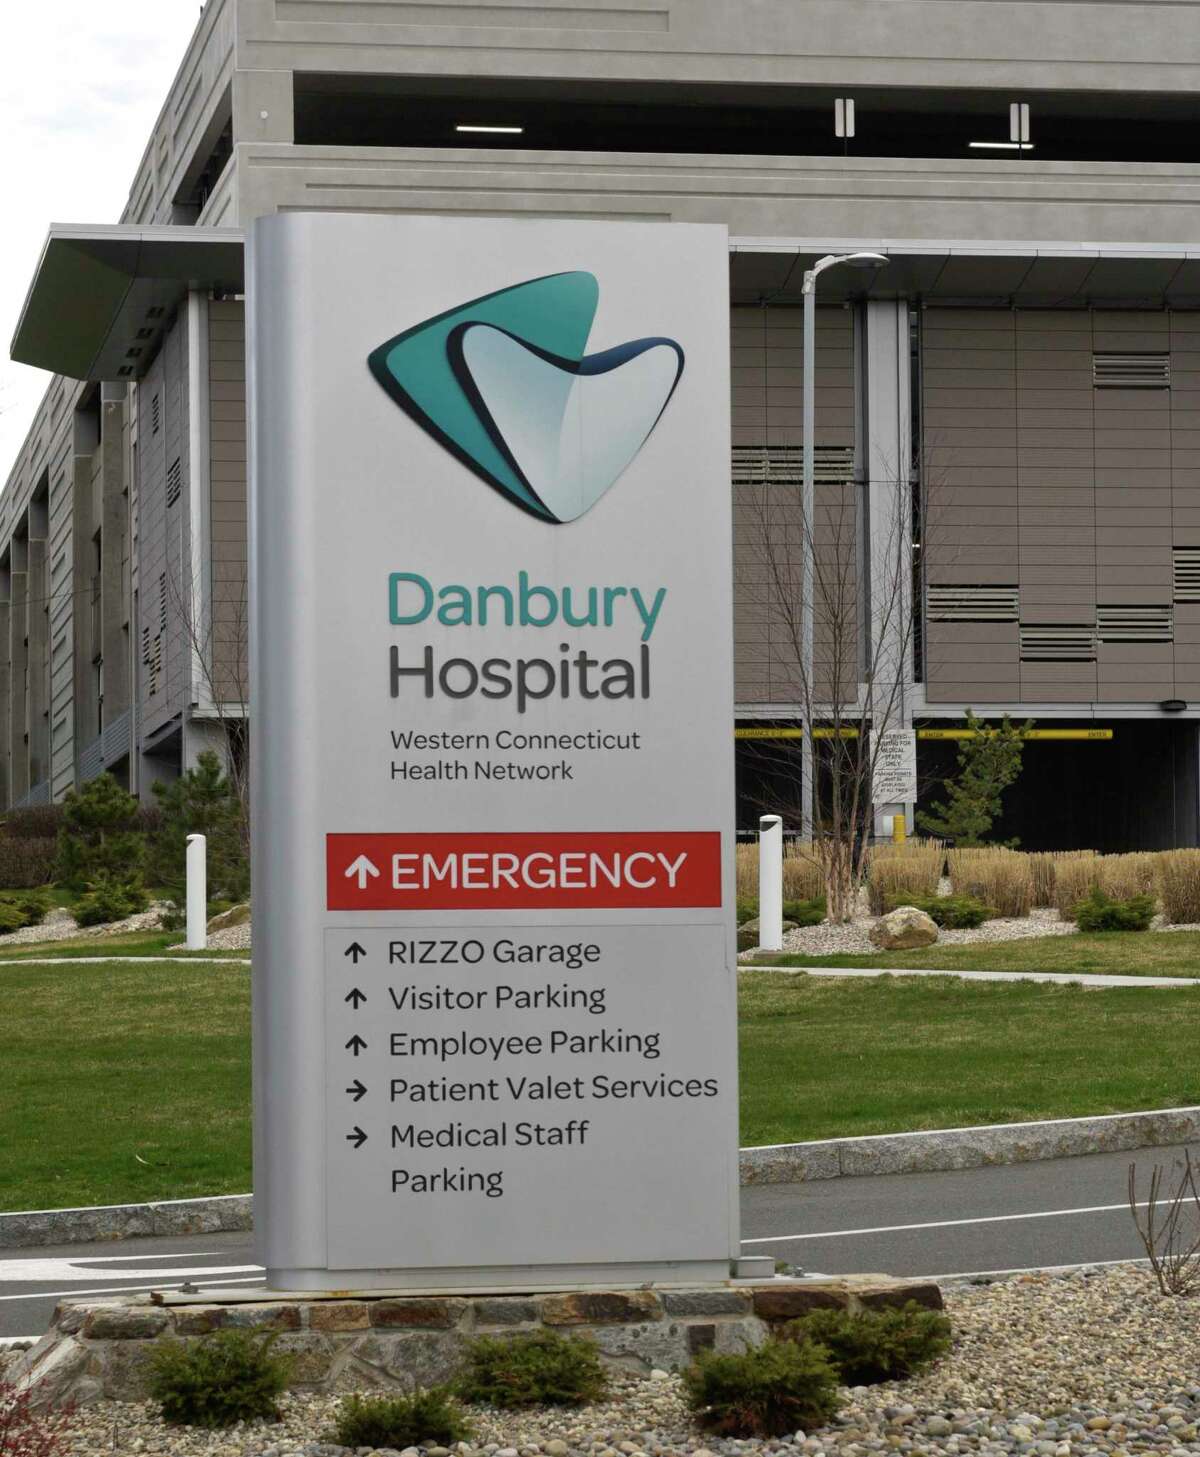 Nuvance Health was recently recognized for cardiac care at its western Connecticut hospitals, including Danbury Hospital.